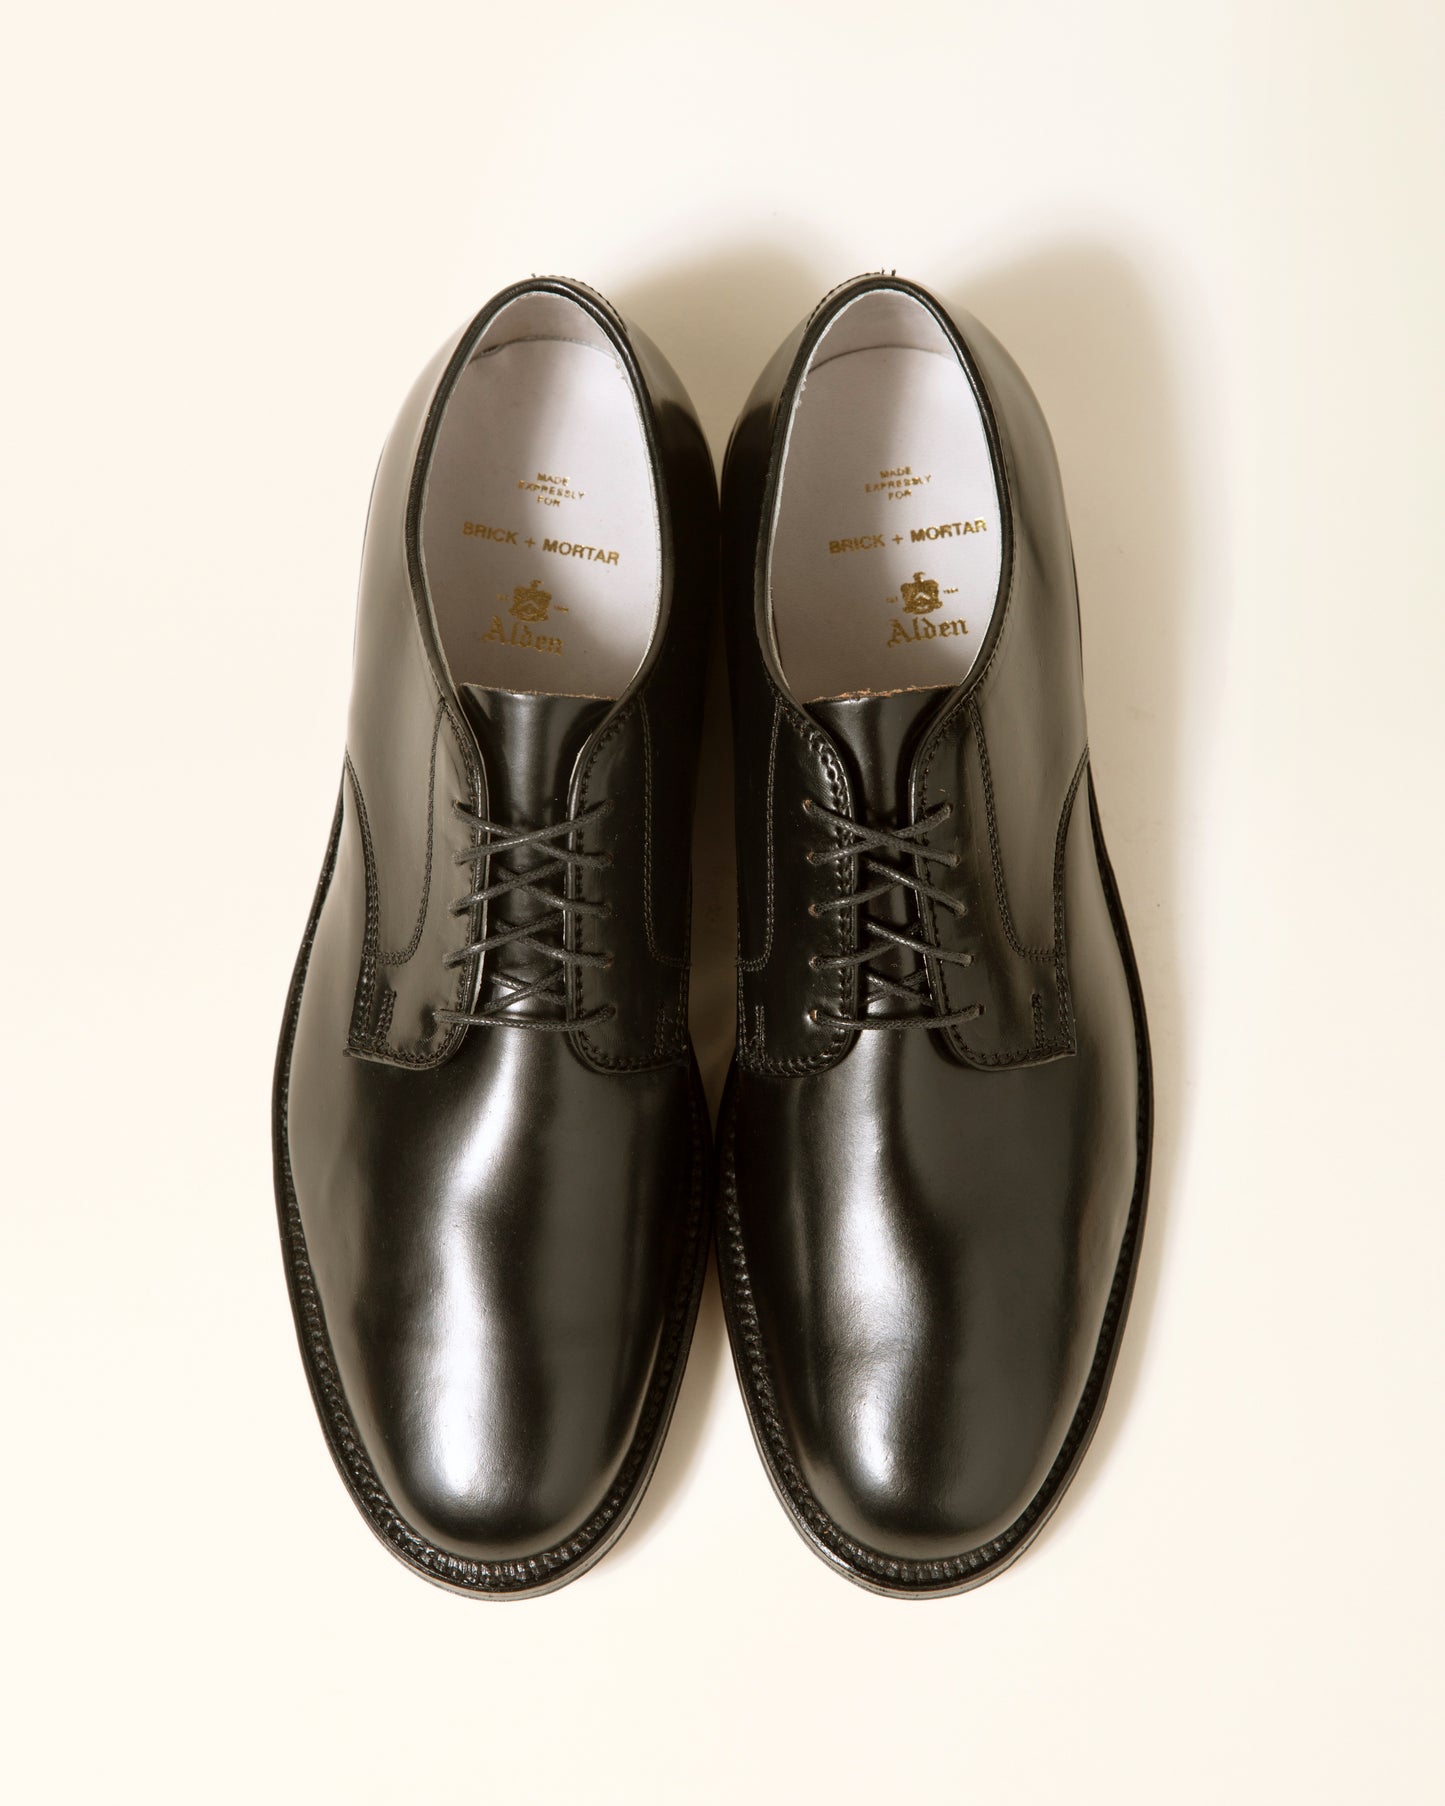 "Victory Heights" Unlined Plain Toe Dover - Black Shell Cordovan